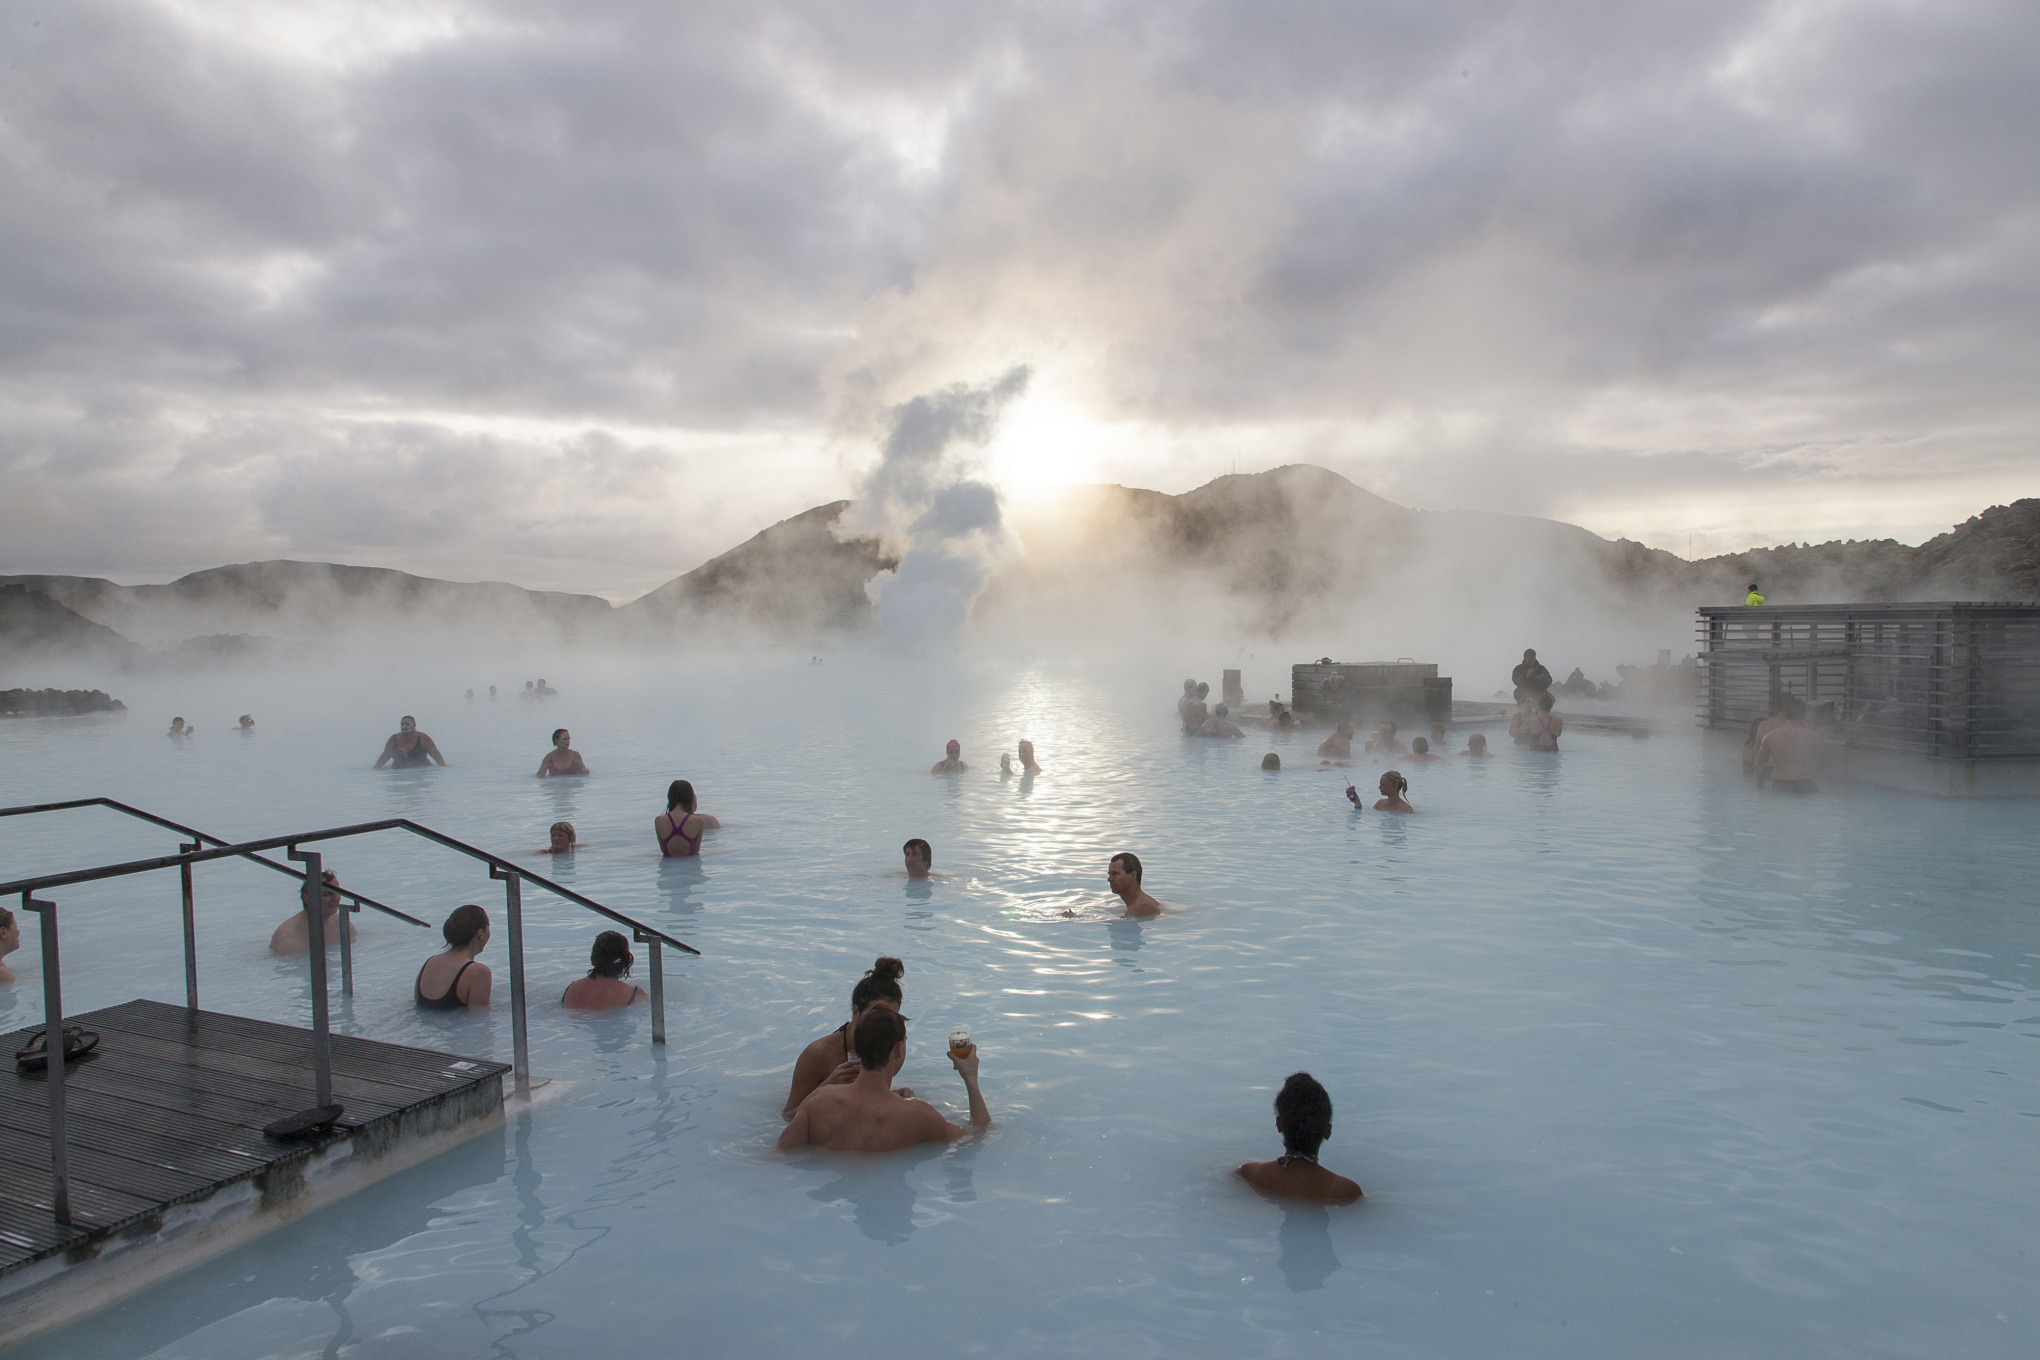 The Blue Lagoon in Iceland - eruption, seismic activity, and volcanic  activity alert!